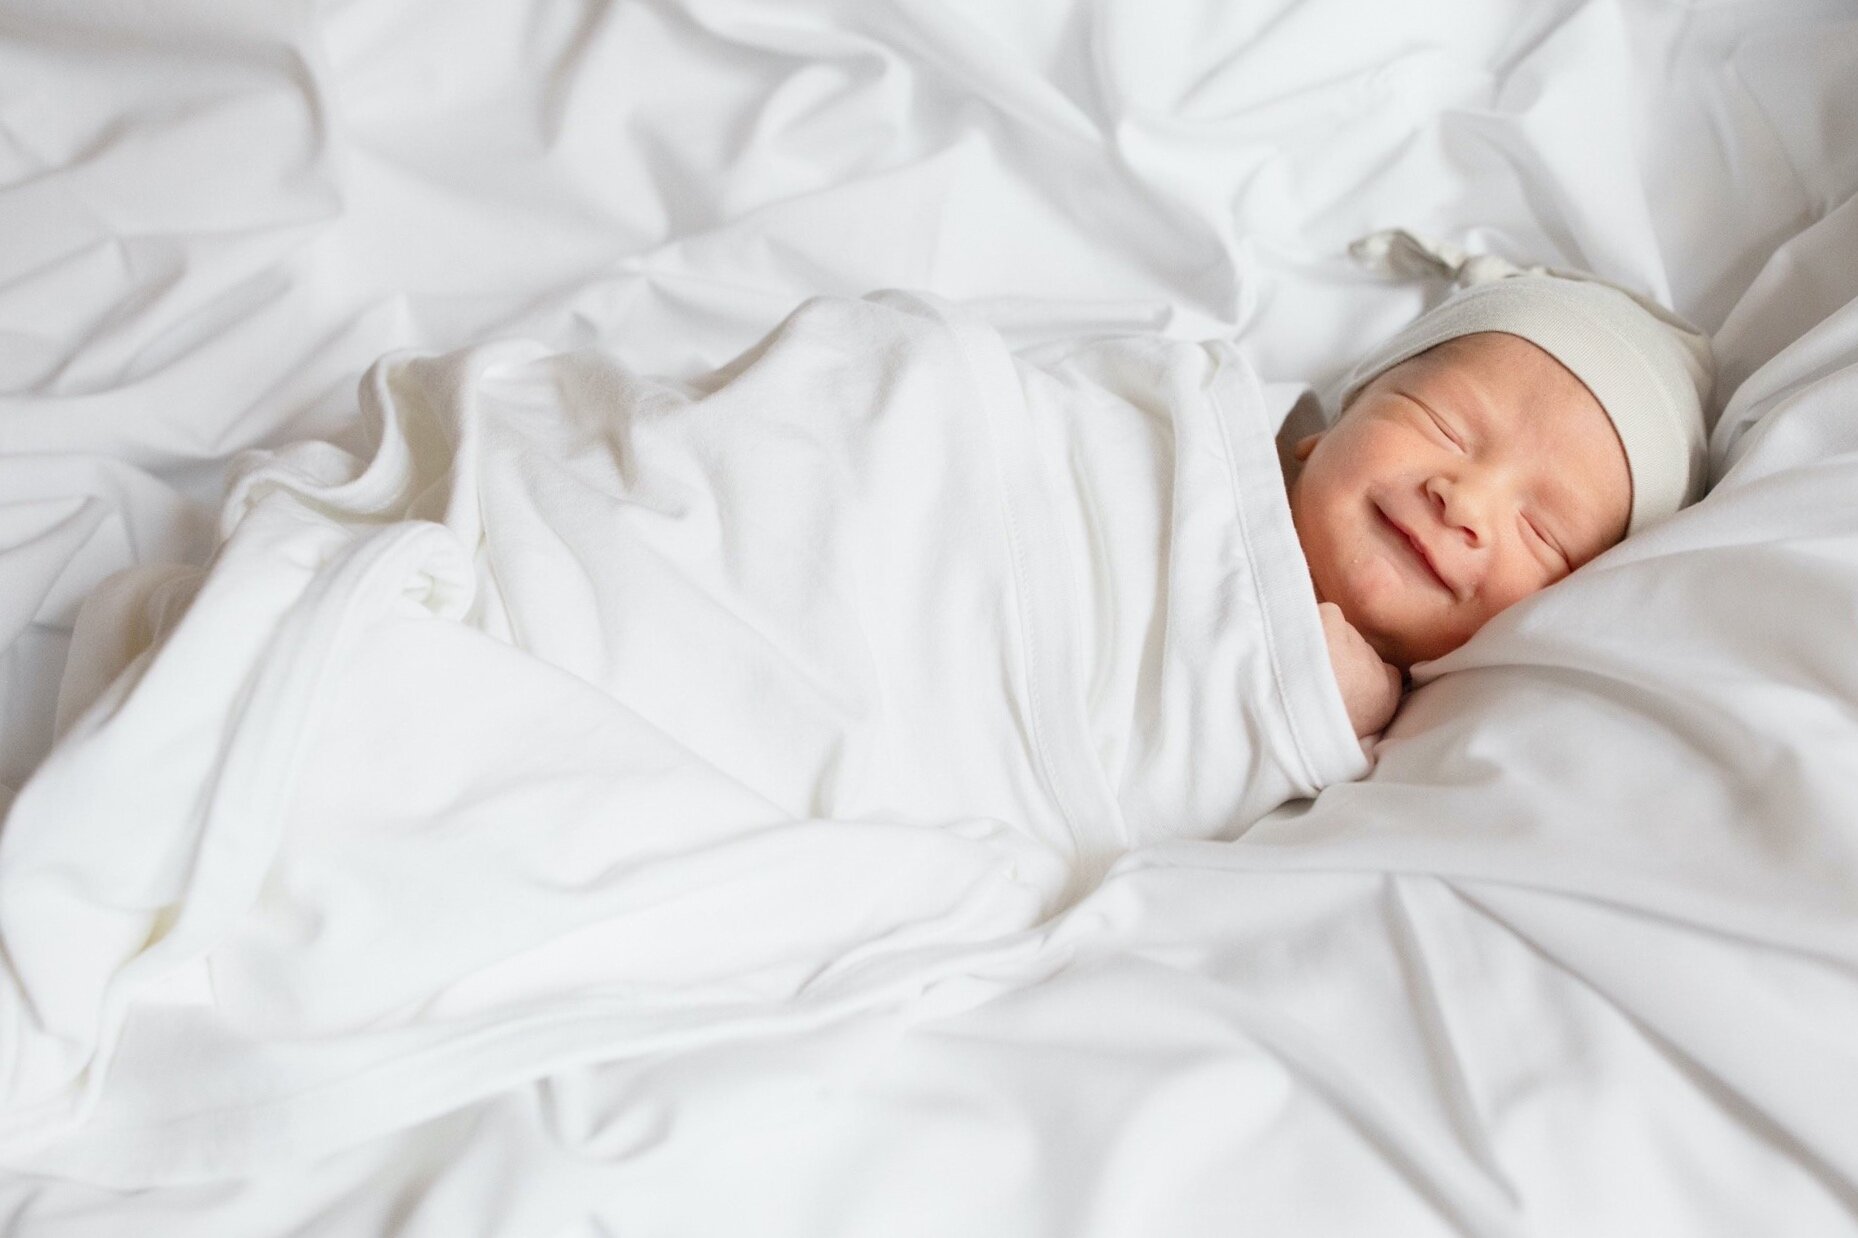 HOW TO BUY THE FIRST REBORN BABY AND LINEN WITHOUT SPENDING TOO